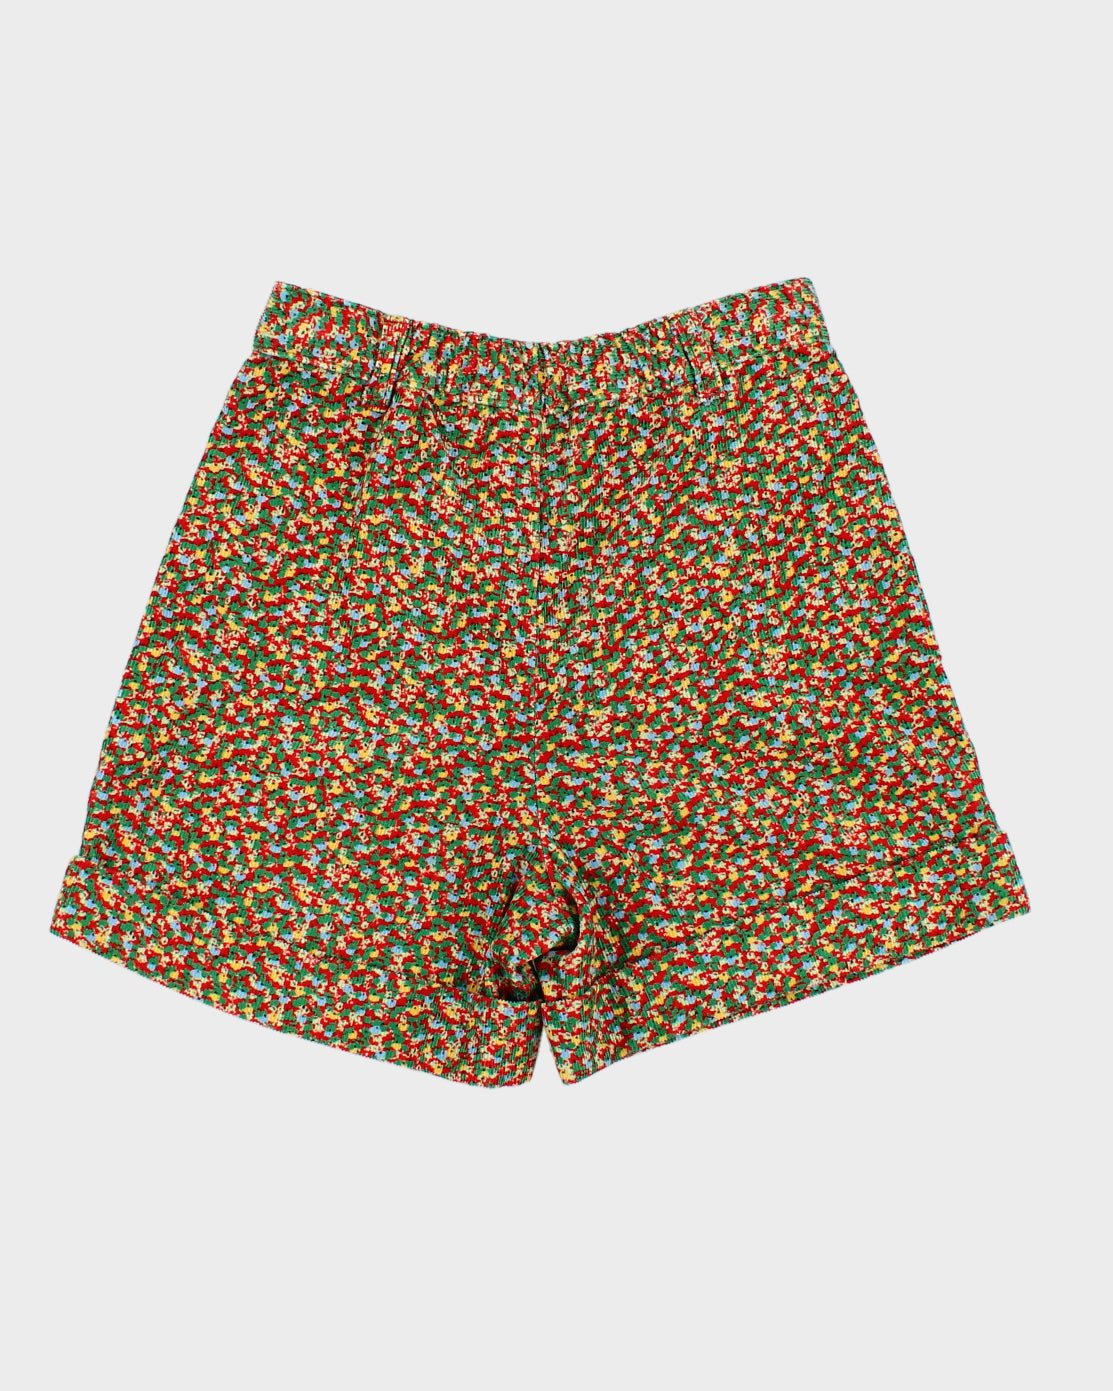 Vintage 90s United Colours Of Benetton Floral Cord Shorts - XS